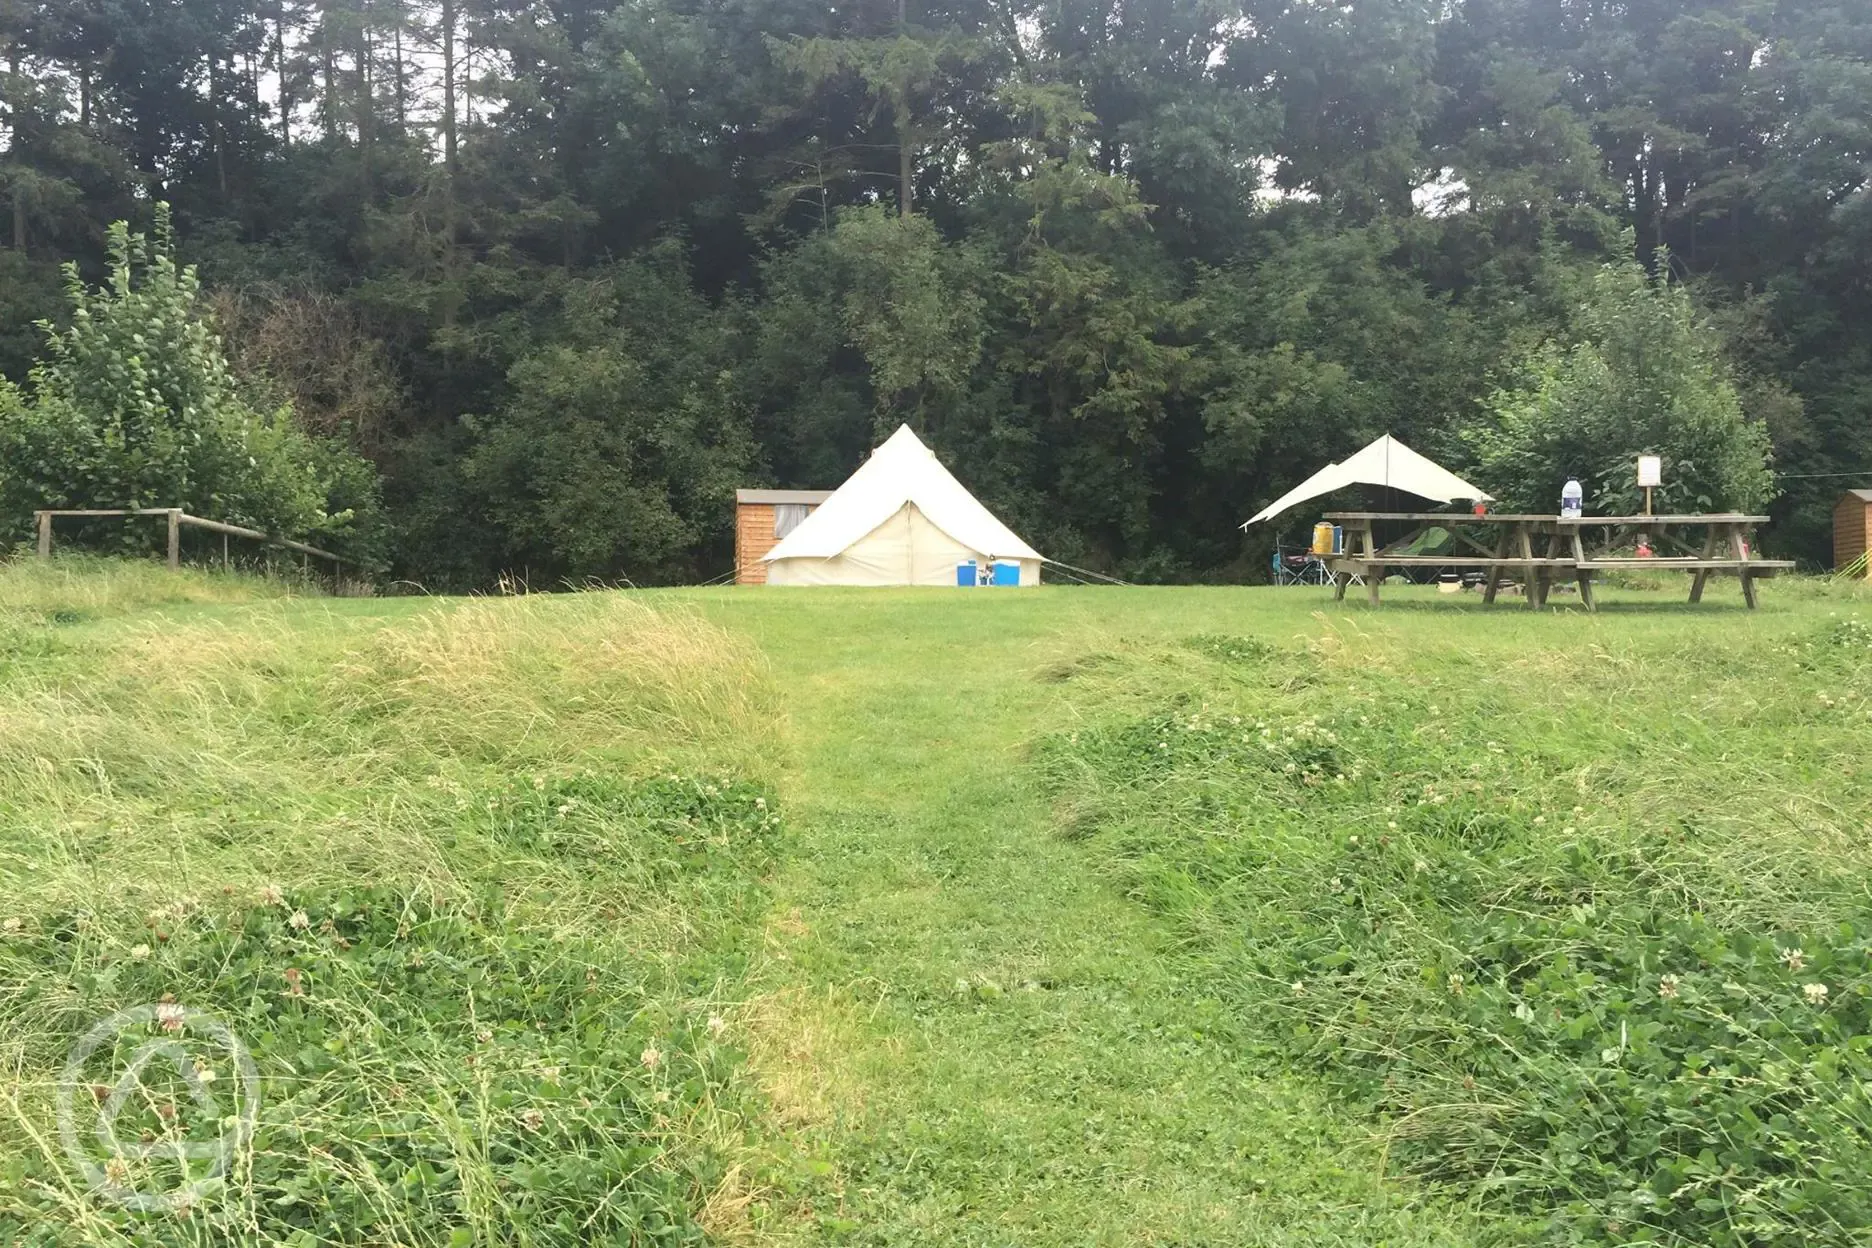 Tents at The Real Campsite